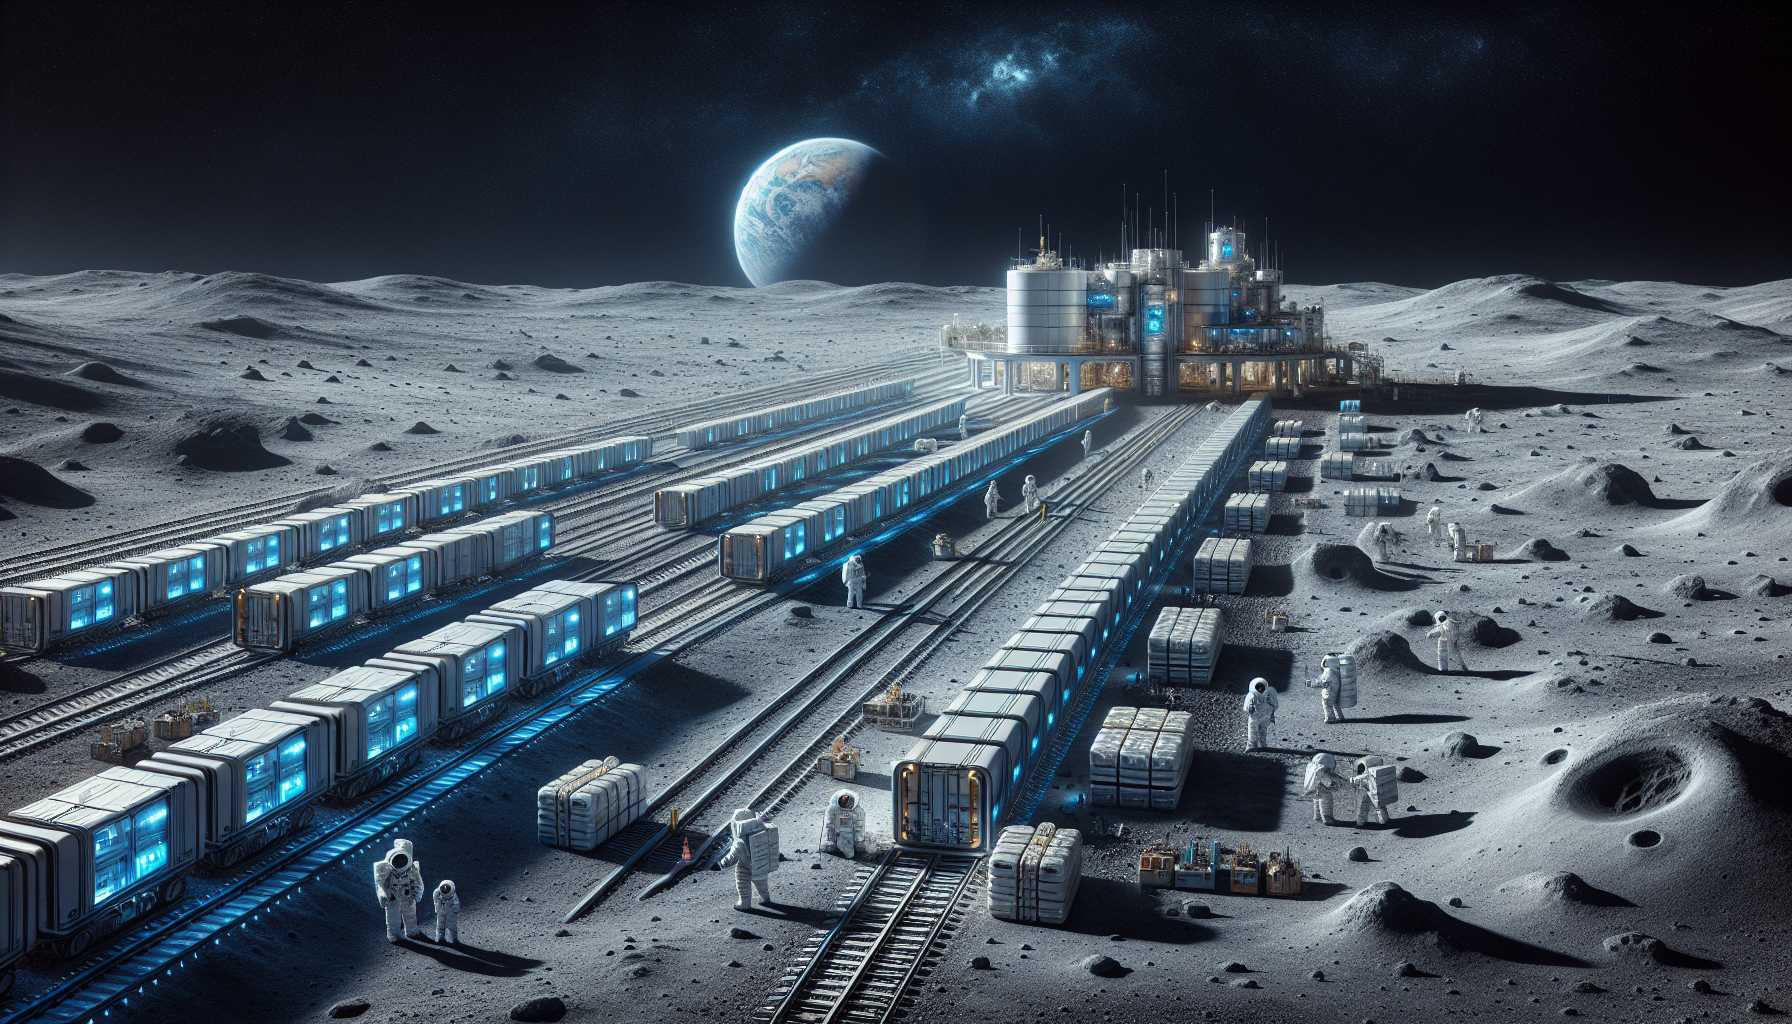 Concept art of a lunar railway network with astronauts and cargo on the Moon